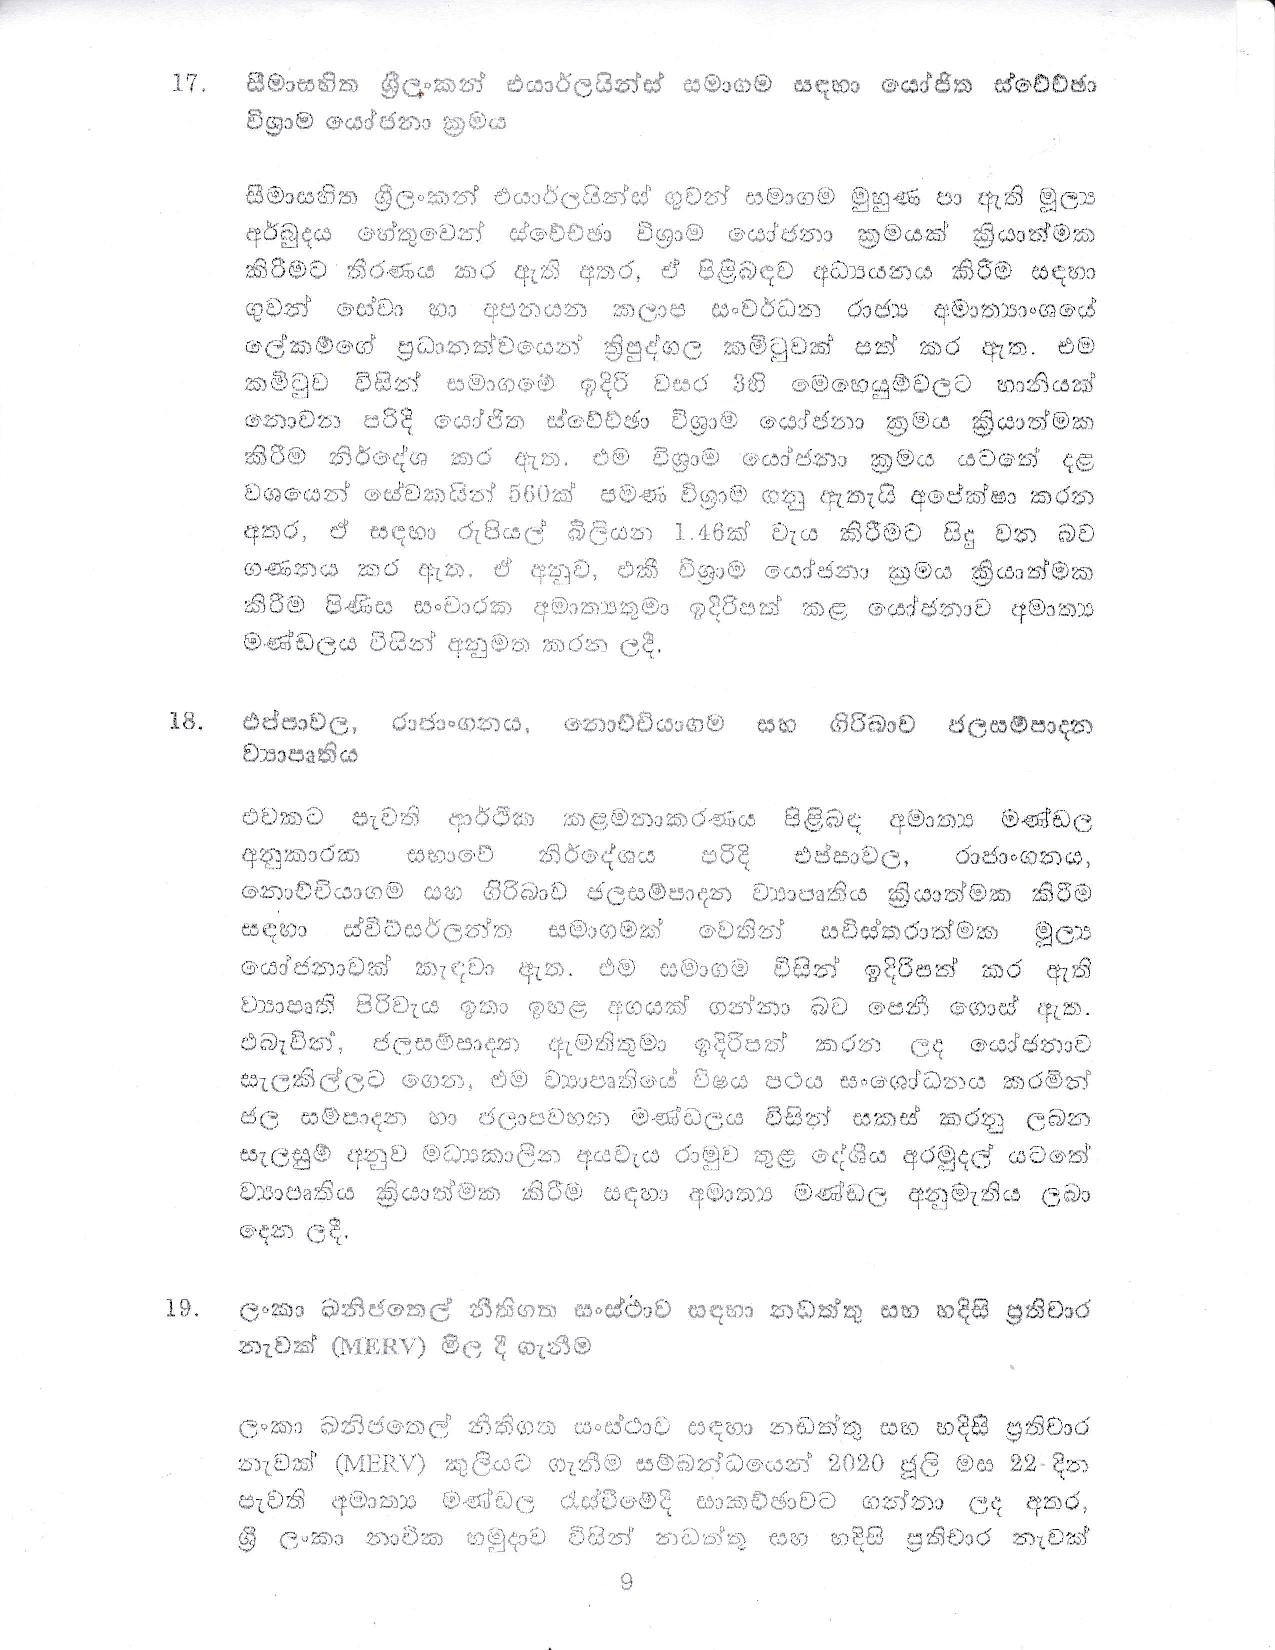 Cabinet Decision on 16.11.2020 page 009